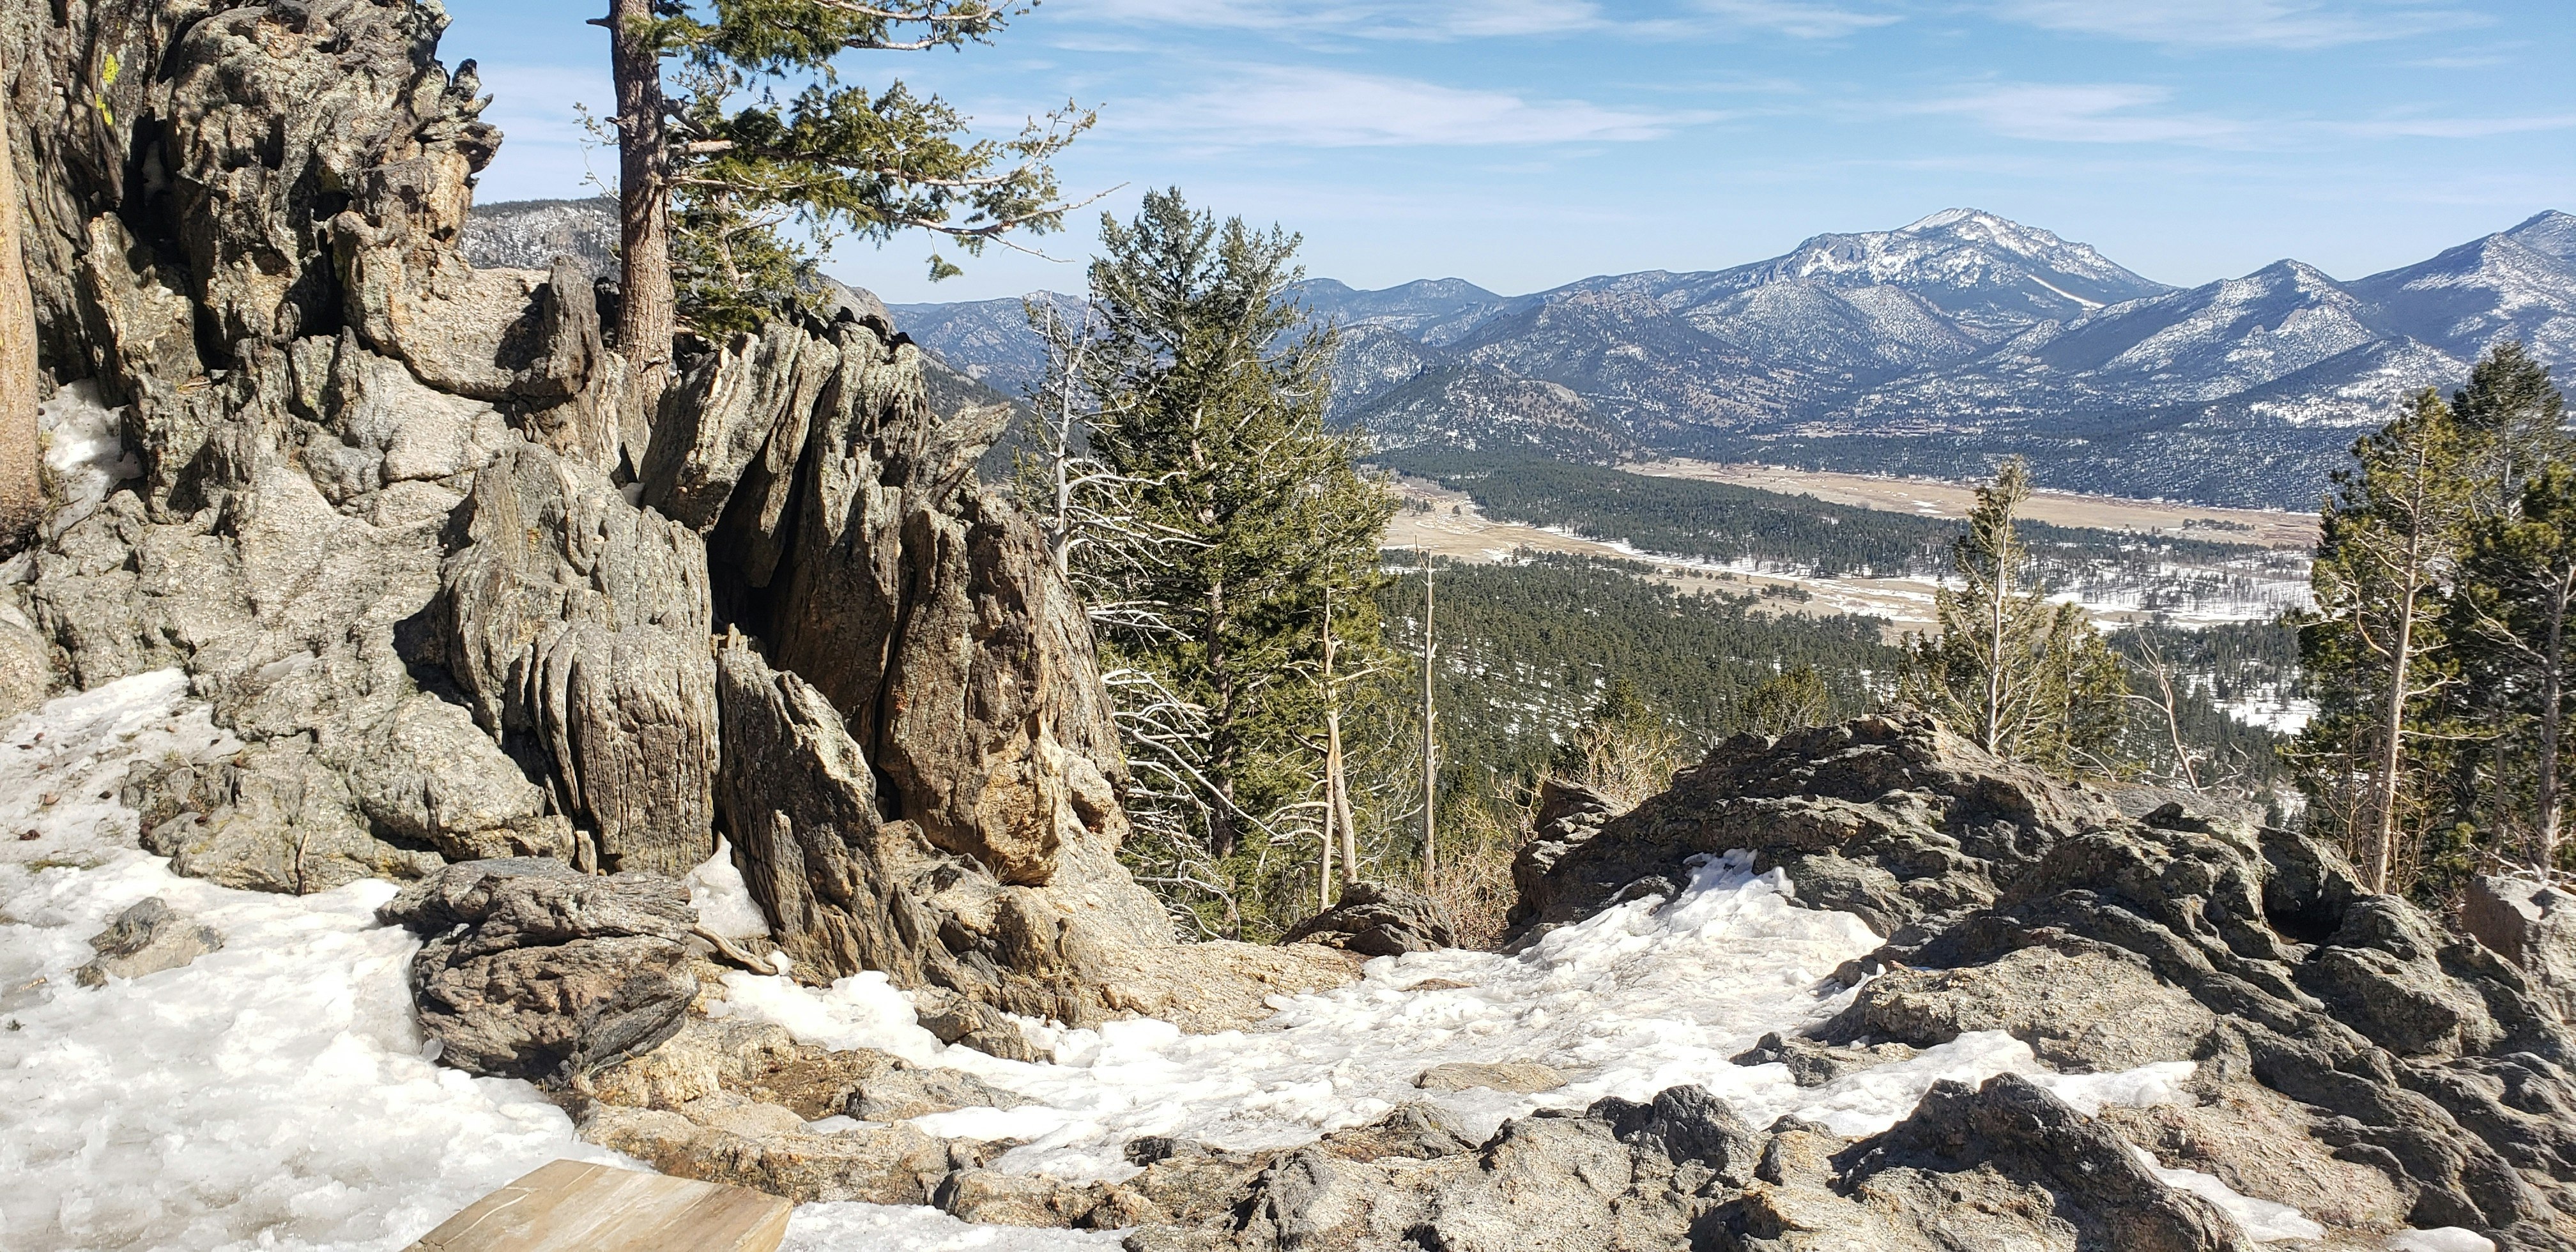 The highest mountain peak available during winter shows plenty of adventures to be had in RMNP